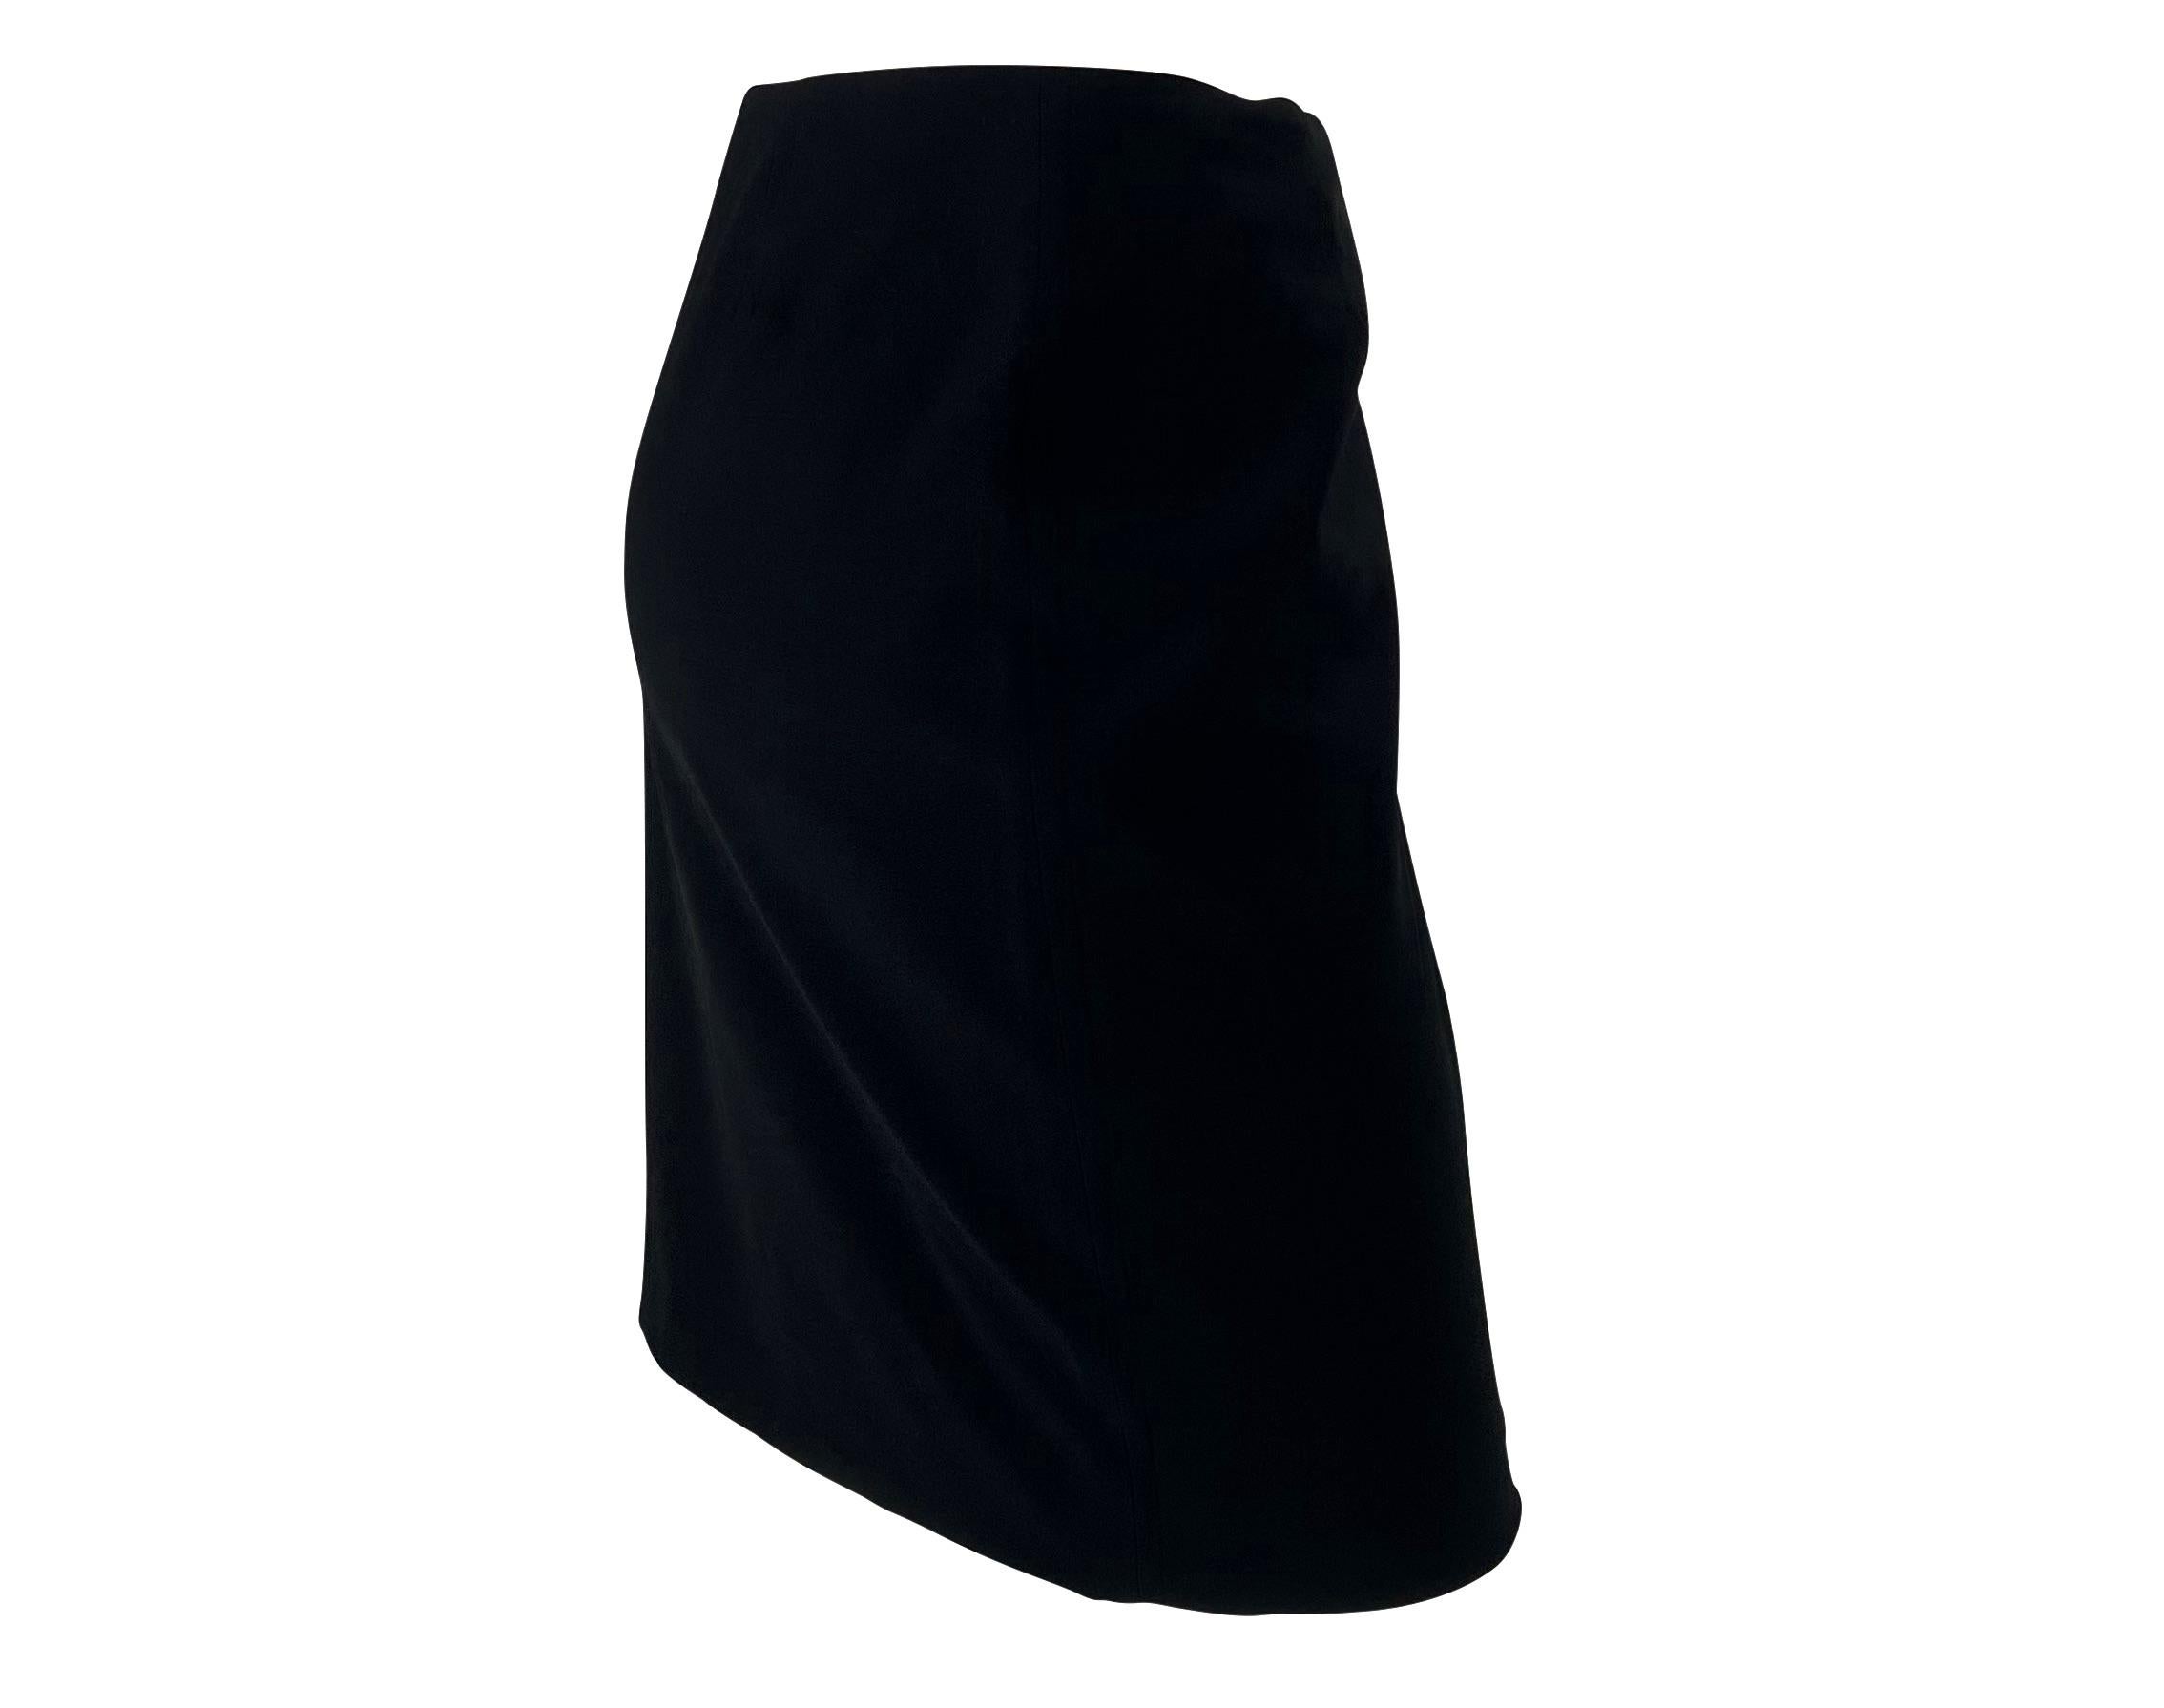 1998 Gucci by Tom Ford G Logo Buckle Wrap Black Stretch Wool Mini Skirt  In Excellent Condition For Sale In West Hollywood, CA